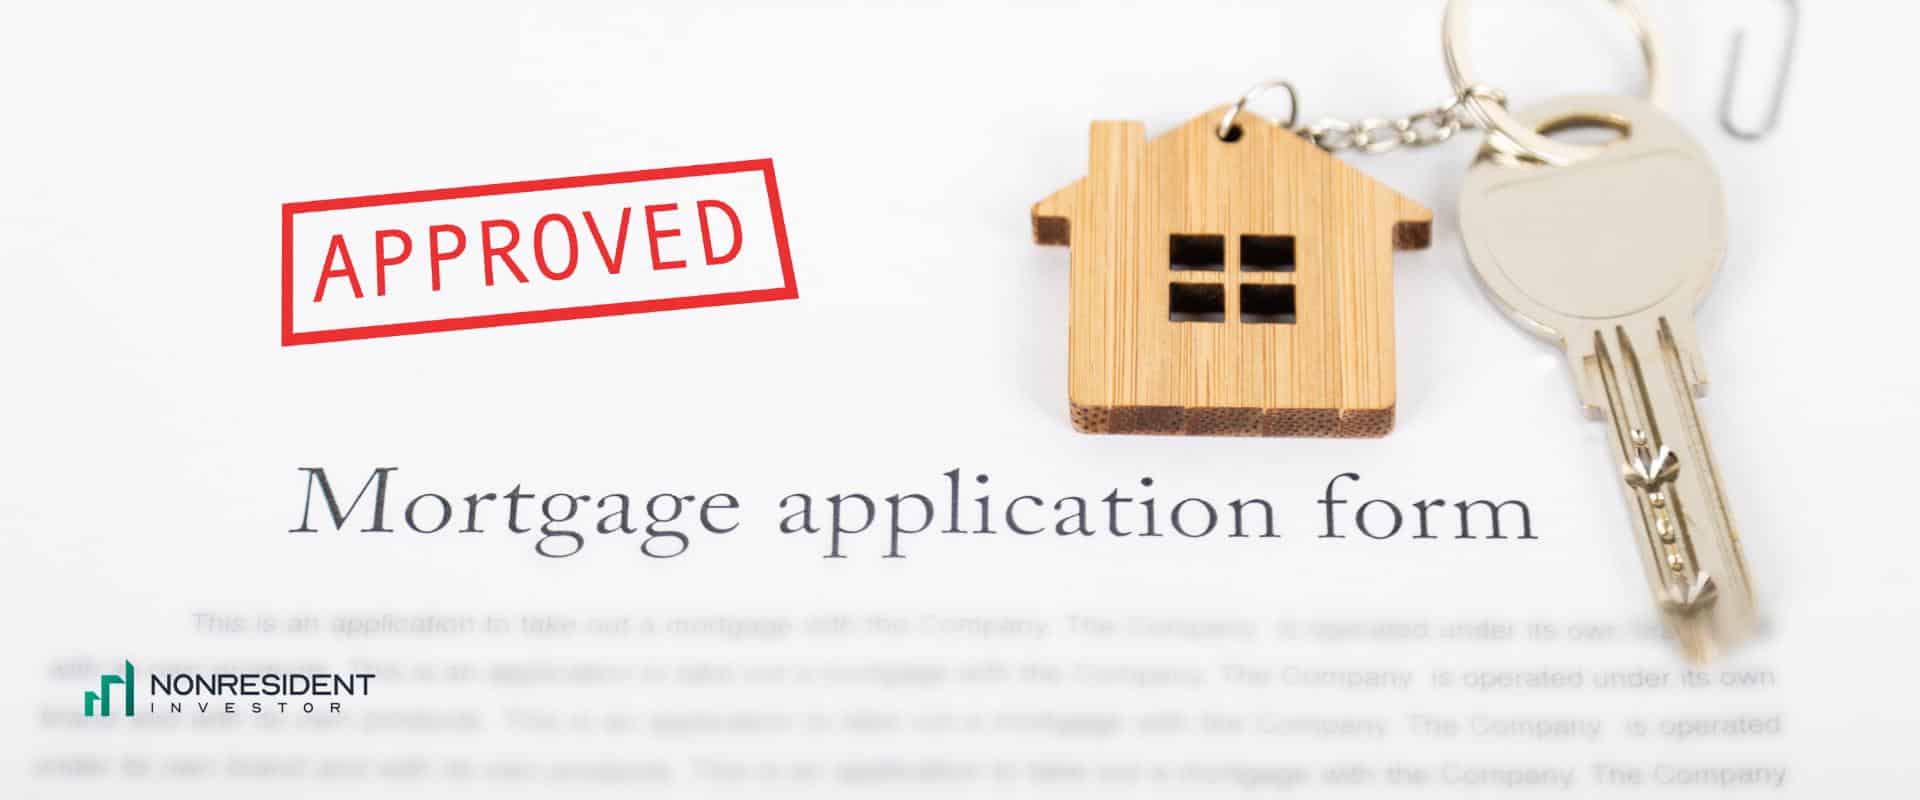 getting a mortgage loan when buying a house on h1b visa in usa